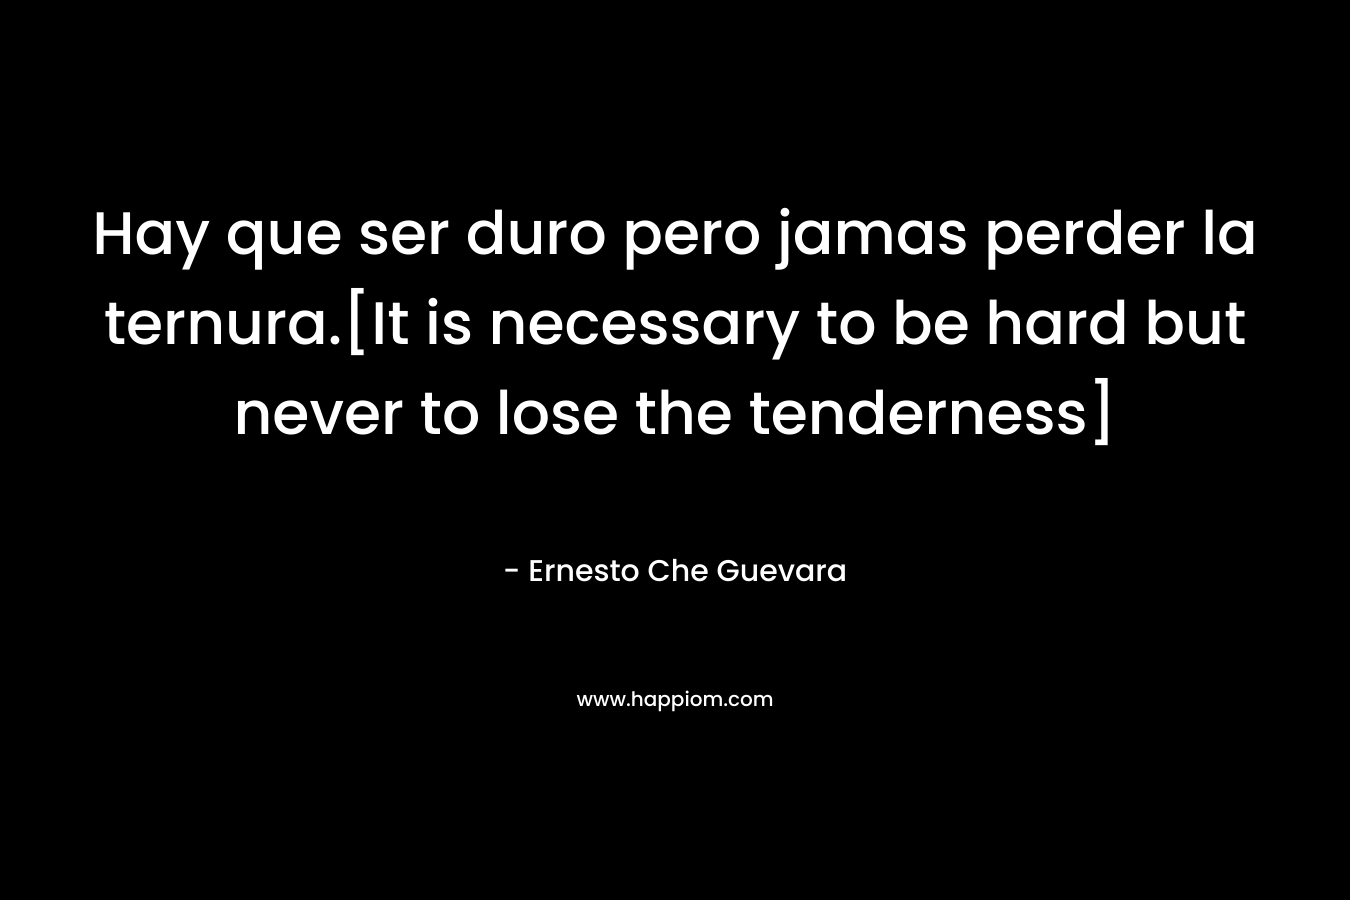 Hay que ser duro pero jamas perder la ternura.[It is necessary to be hard but never to lose the tenderness] – Ernesto Che Guevara